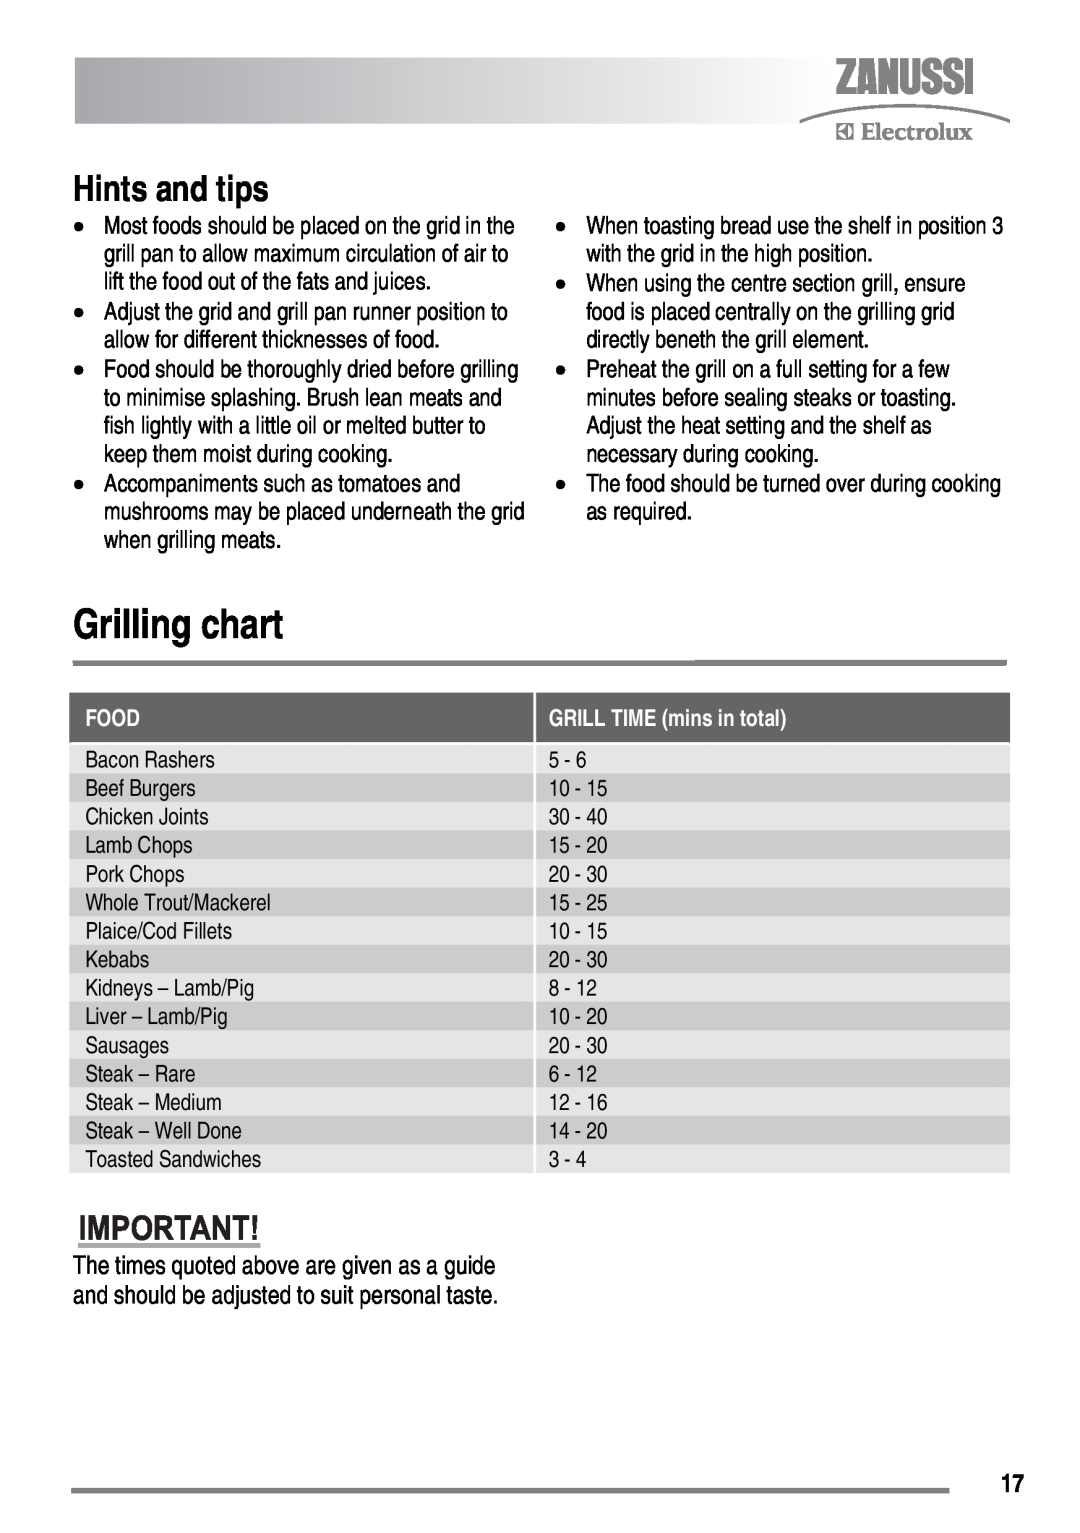 Zanussi ZKM6040 user manual Grilling chart, Hints and tips, The food should be turned over during cooking as required, Food 